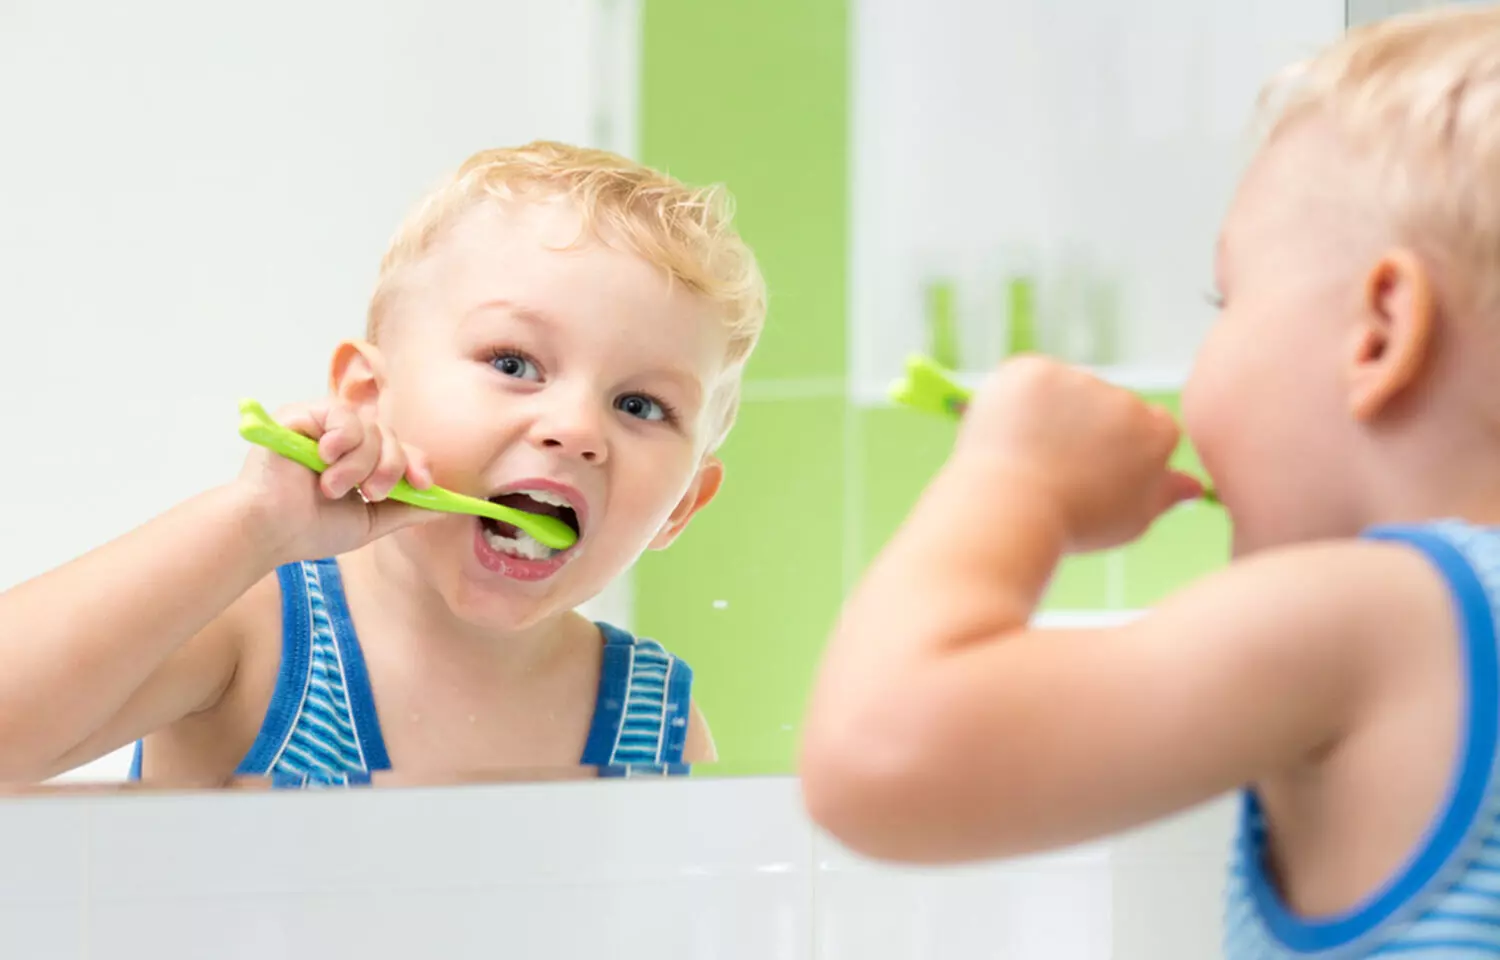 Mothers mental health linked to toothbrushing habits in children: Study